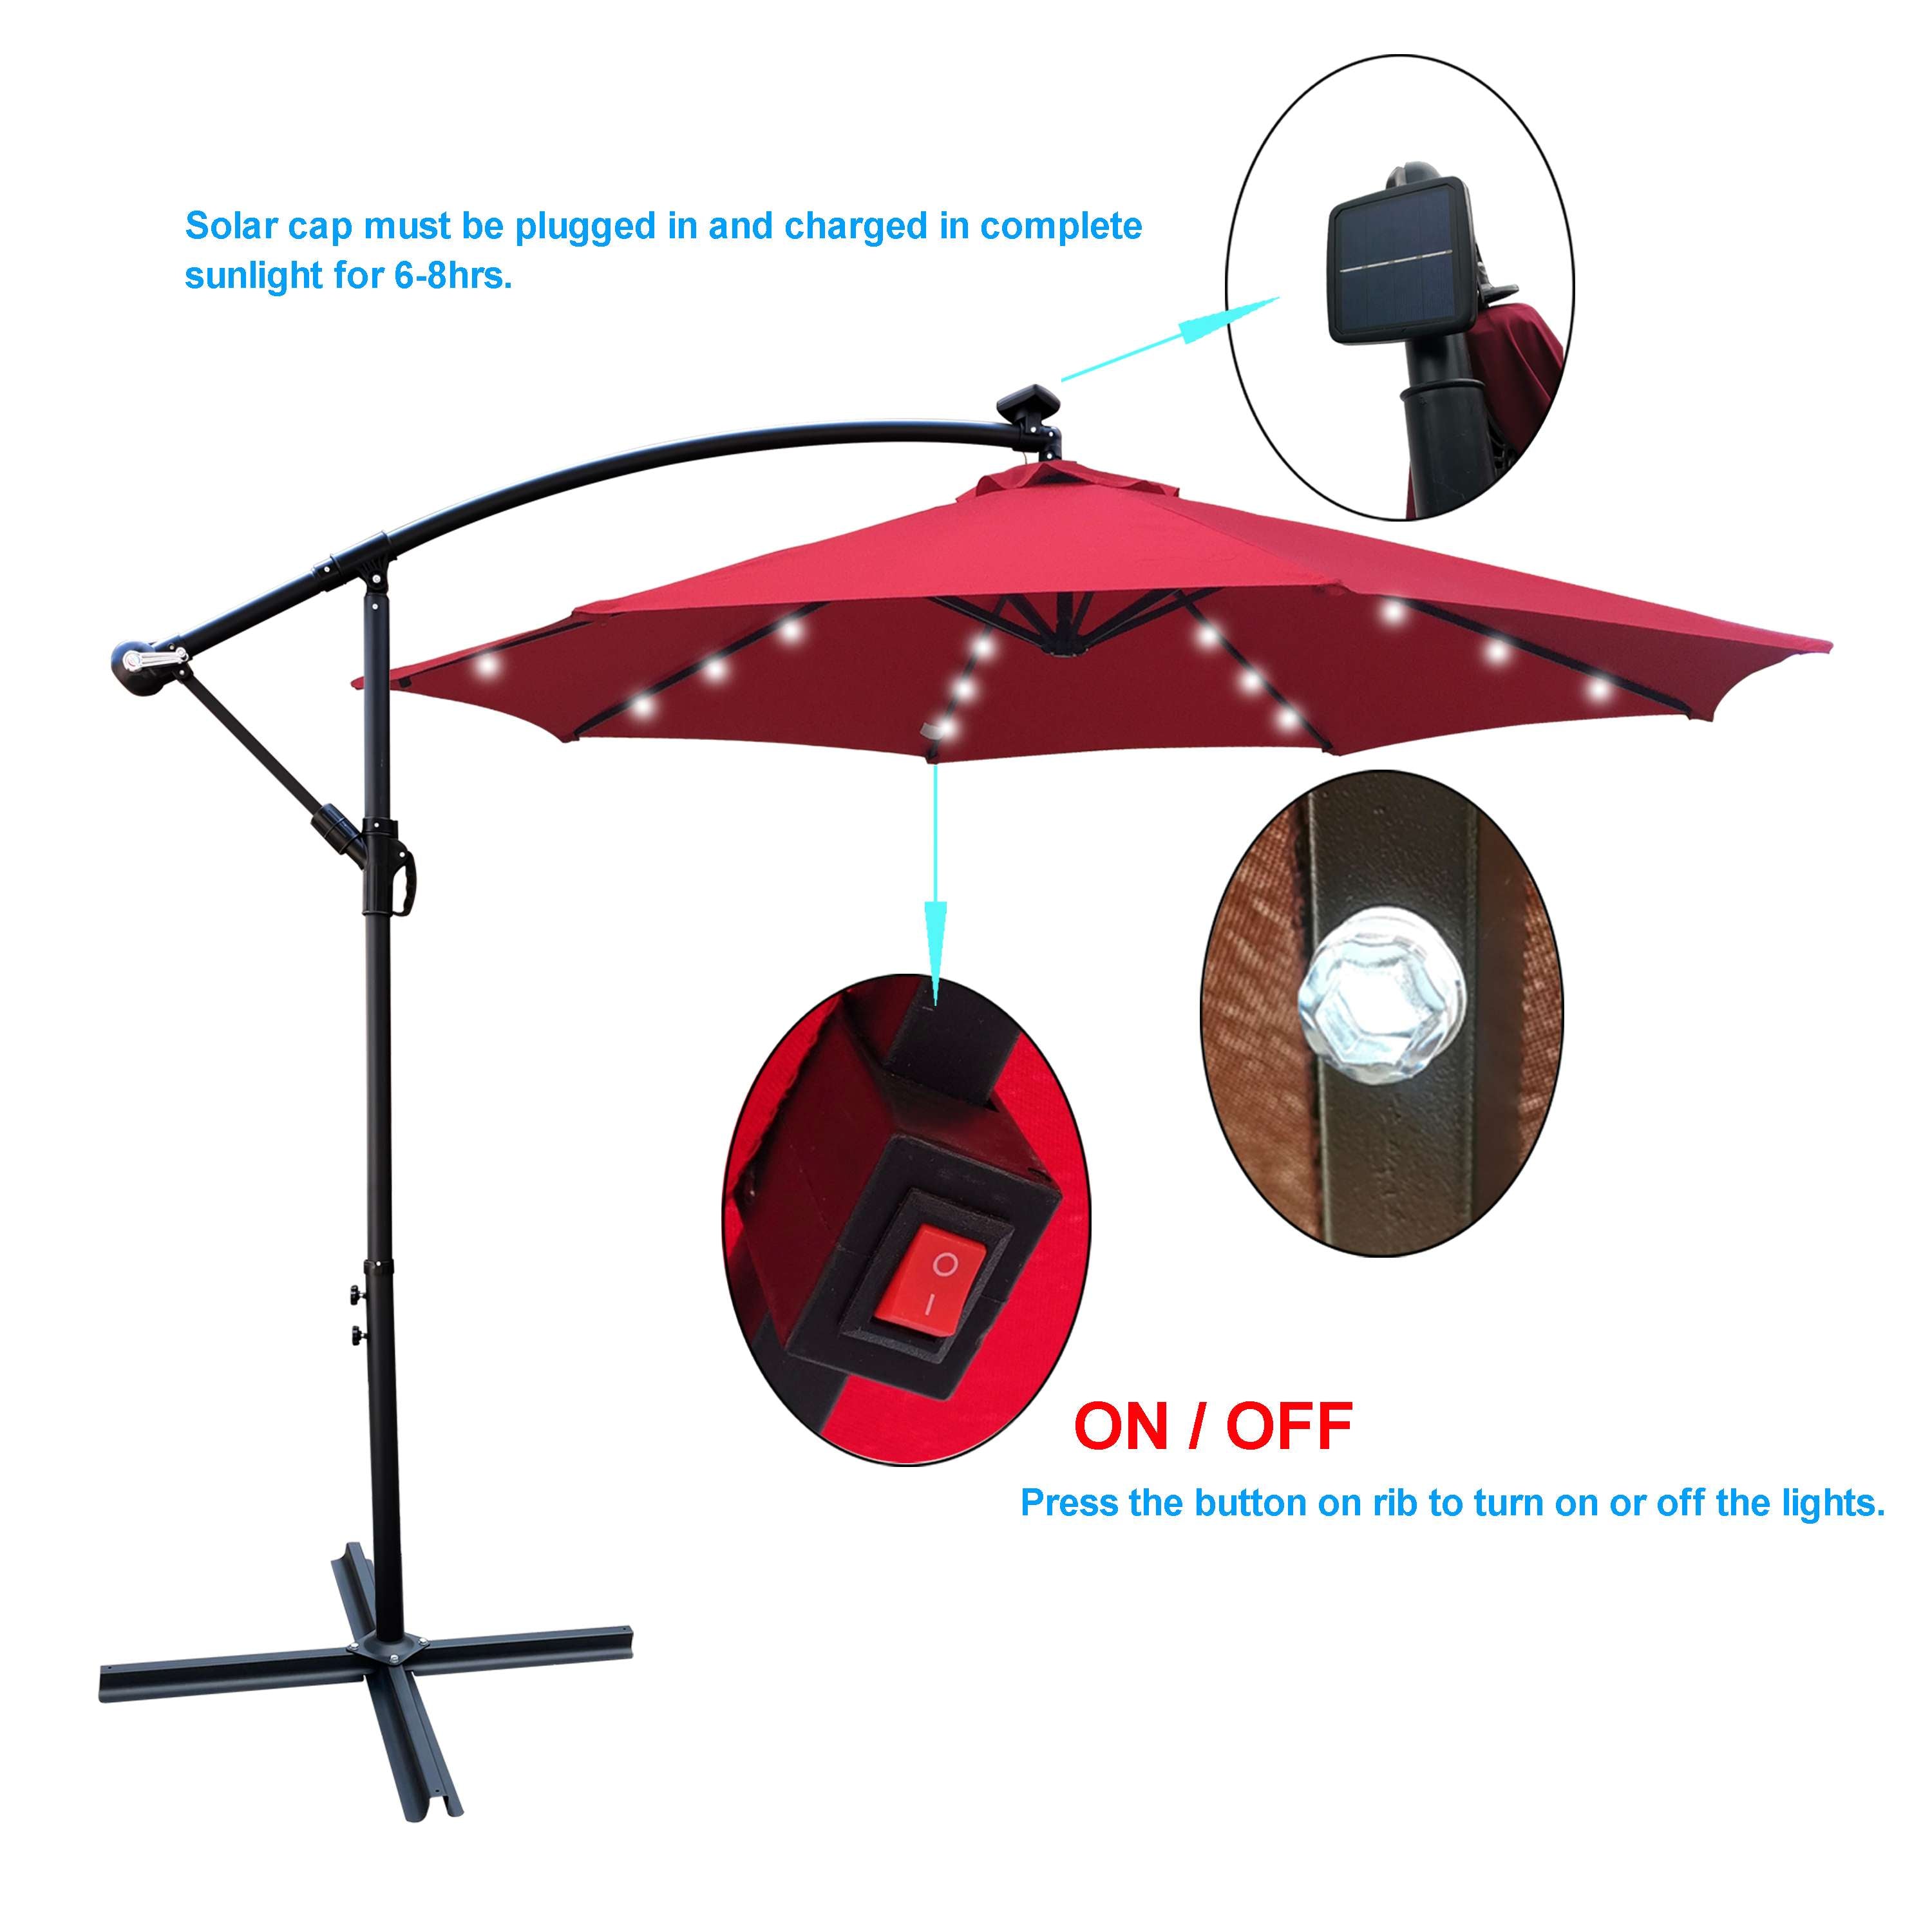 [KGORGE Plus] 10 ft Outdoor Patio Umbrella Solar Powered LED Lighted for Garden Backyard Pool